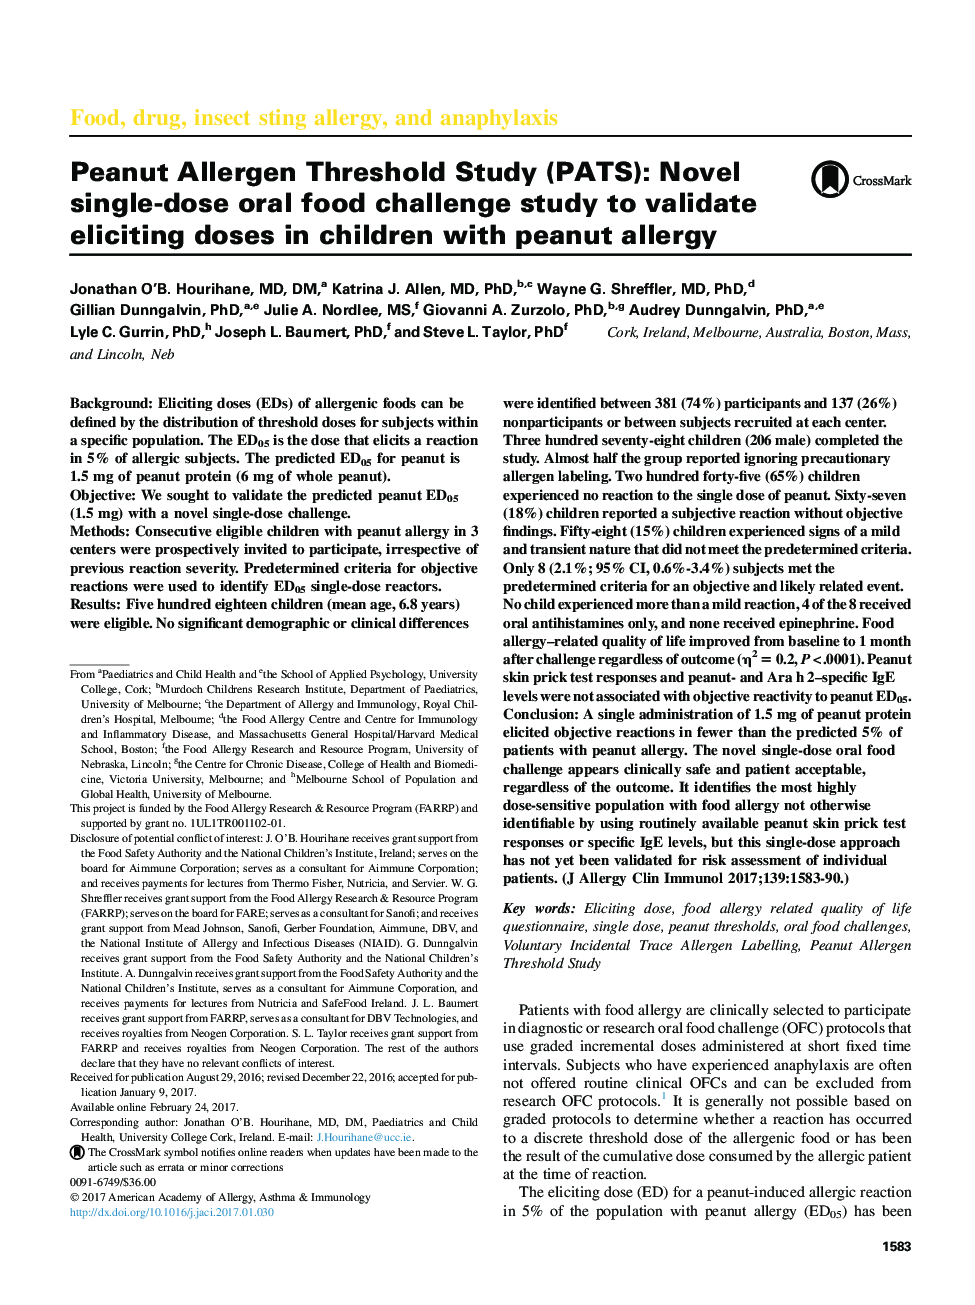 Peanut Allergen Threshold Study (PATS): Novel single-dose oral food challenge study to validate eliciting doses in children with peanut allergy